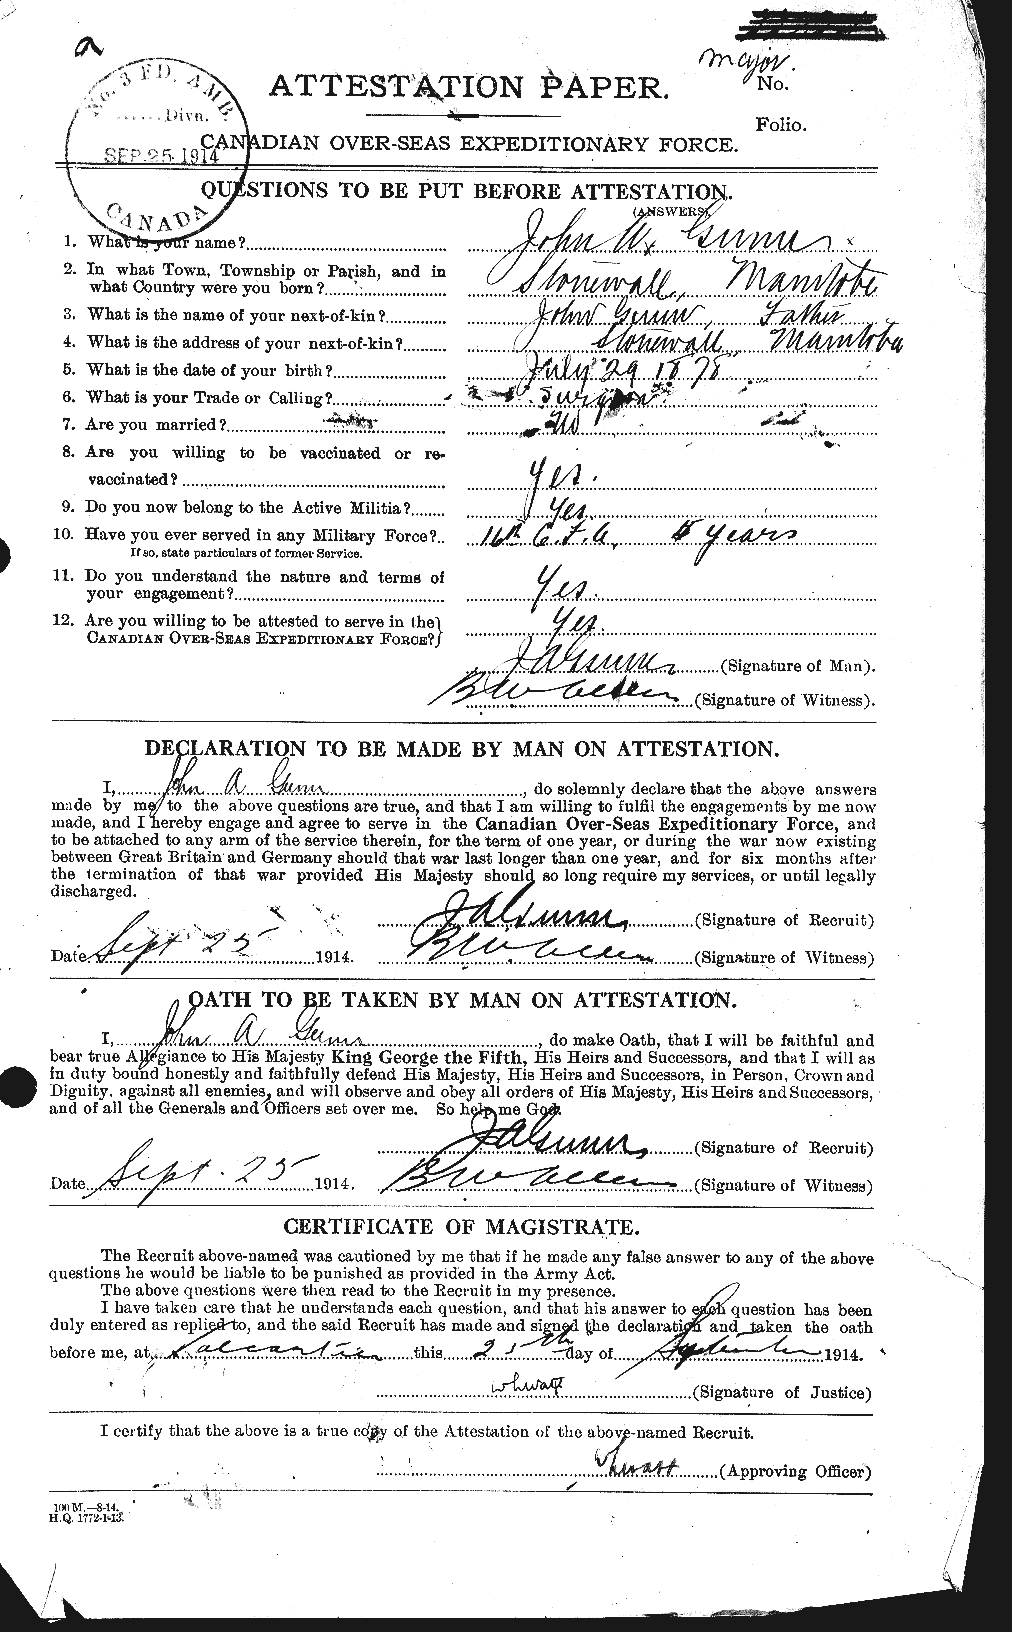 Personnel Records of the First World War - CEF 369304a